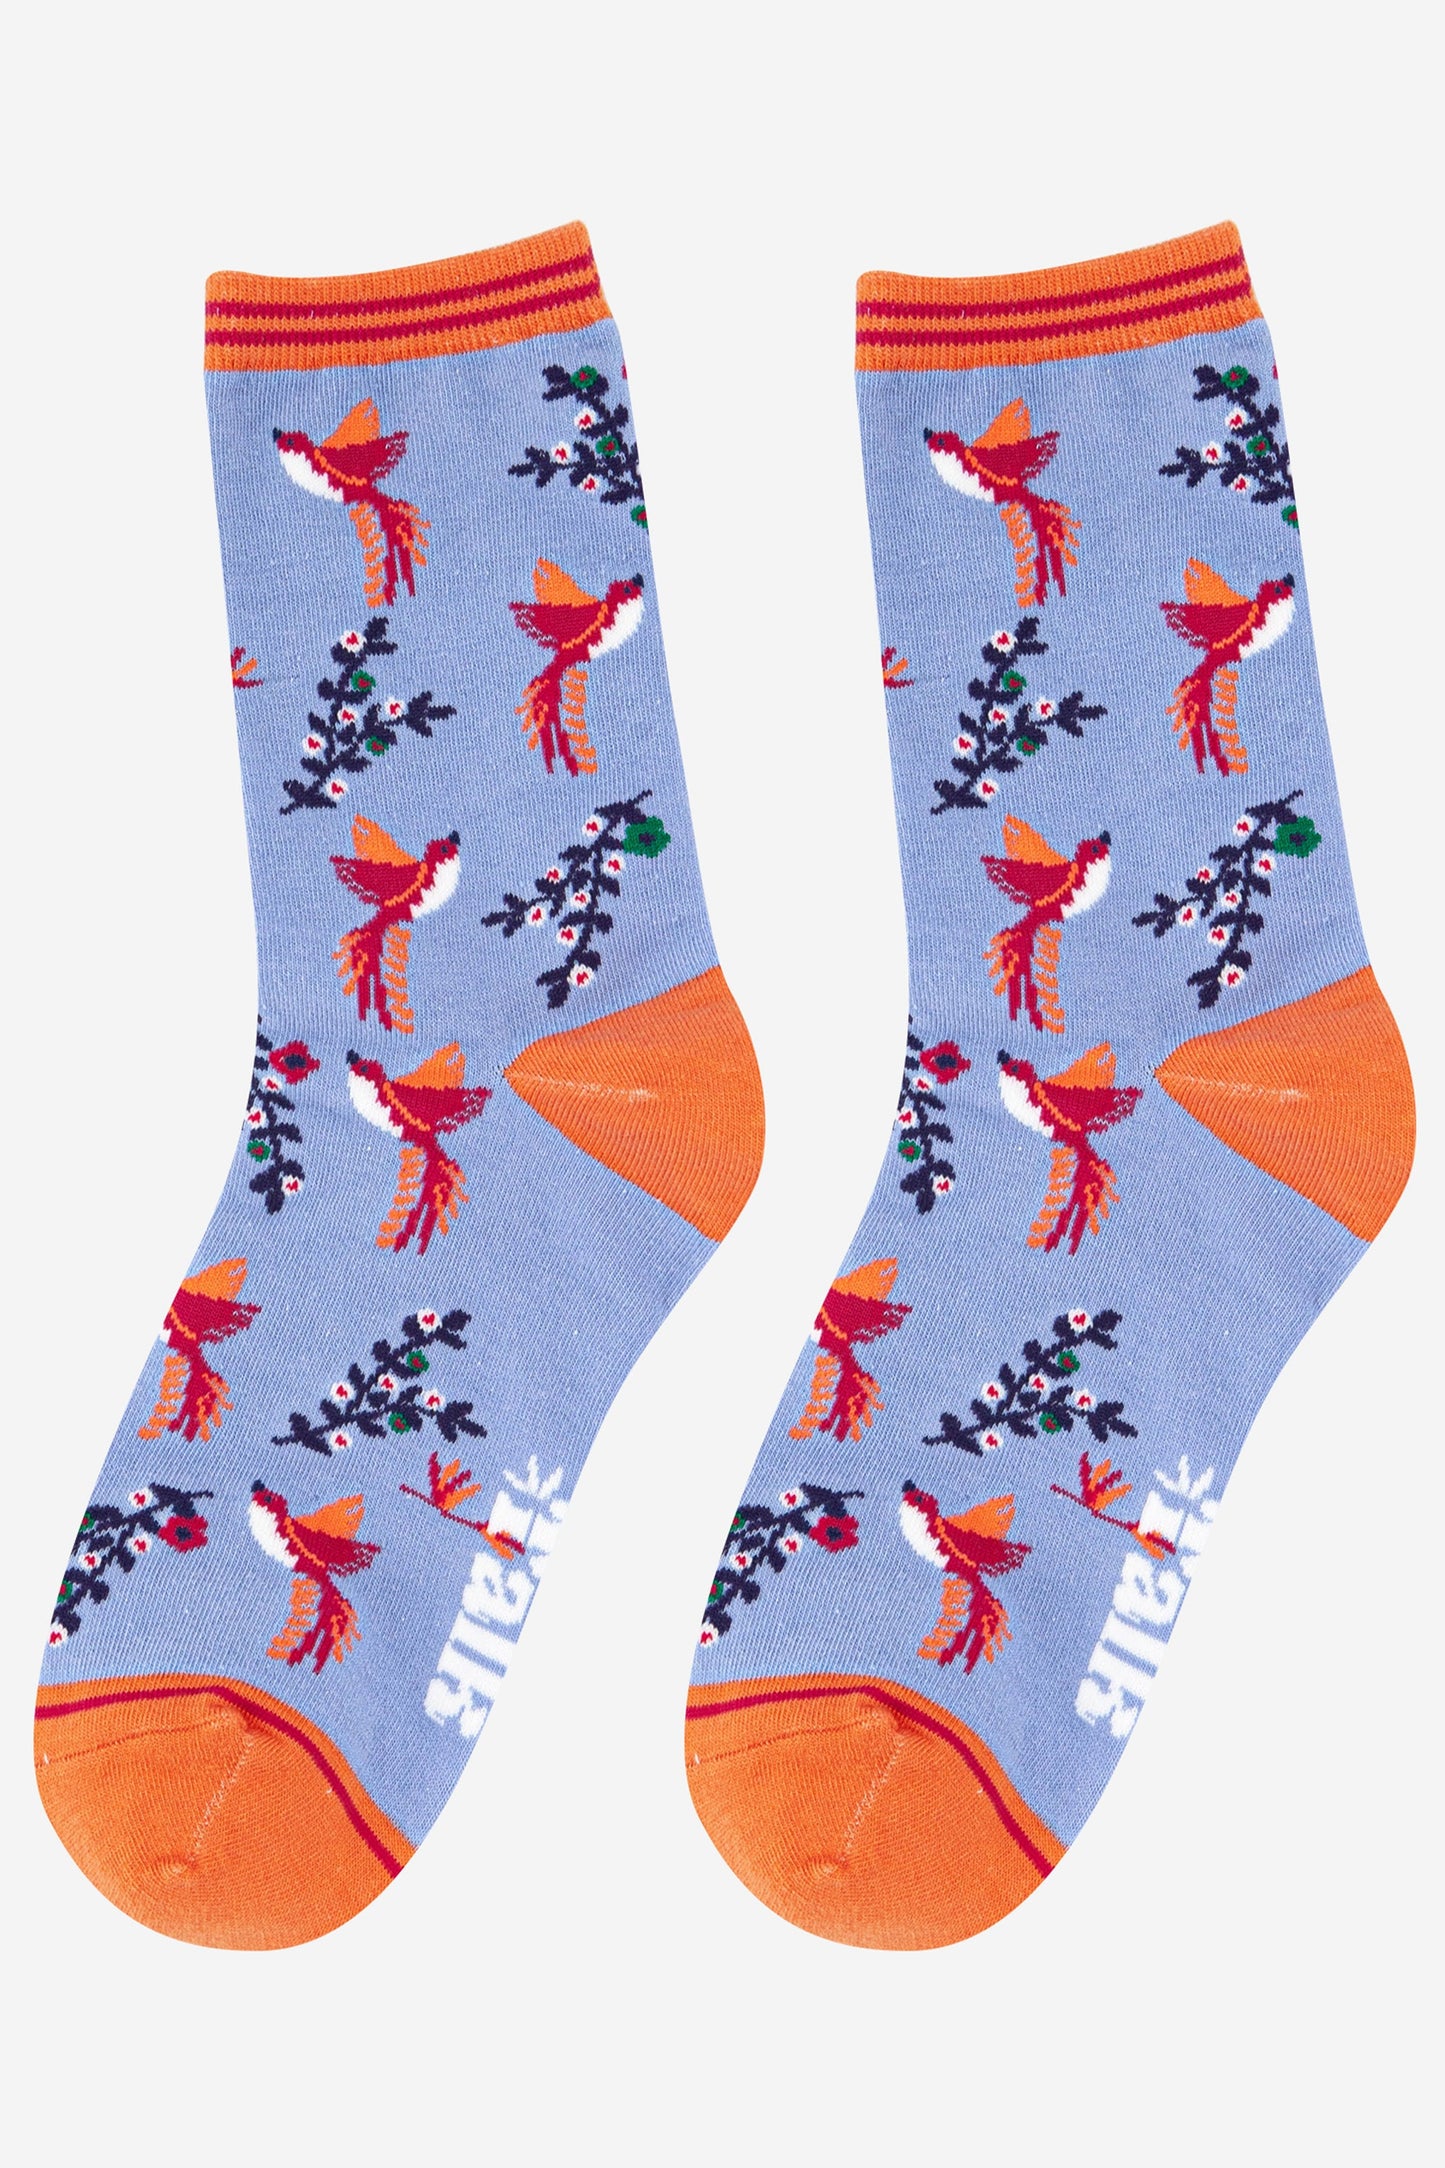 blue bamboo socks with pink hummingbirds and navy blue floral vines